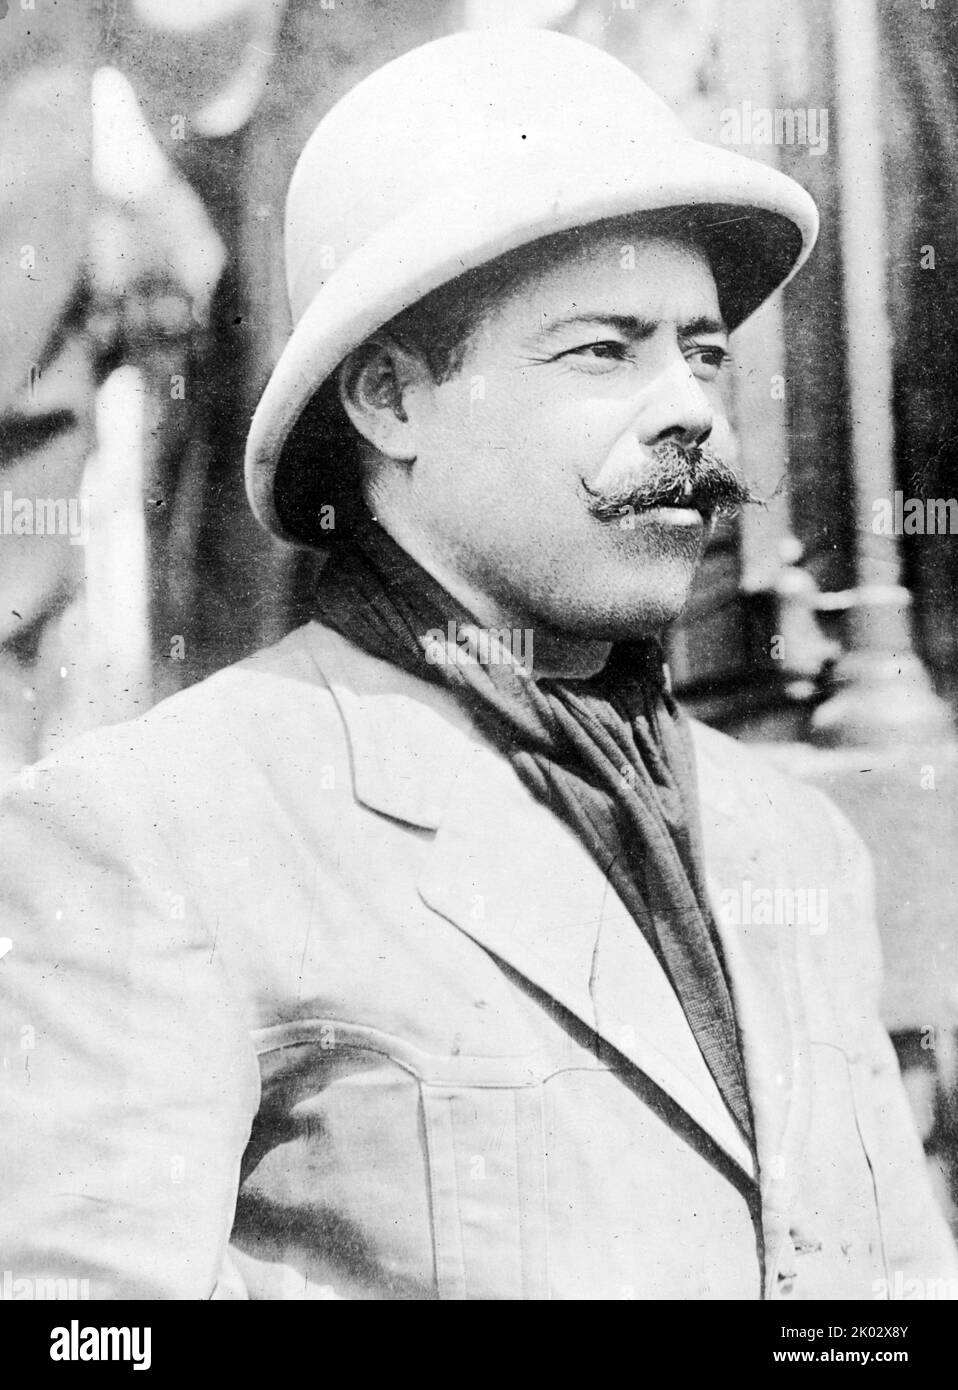 Francisco 'Pancho' Villa (1878 - 1923) Mexican revolutionary general and one of the most prominent figures of the Mexican Revolution. Stock Photo